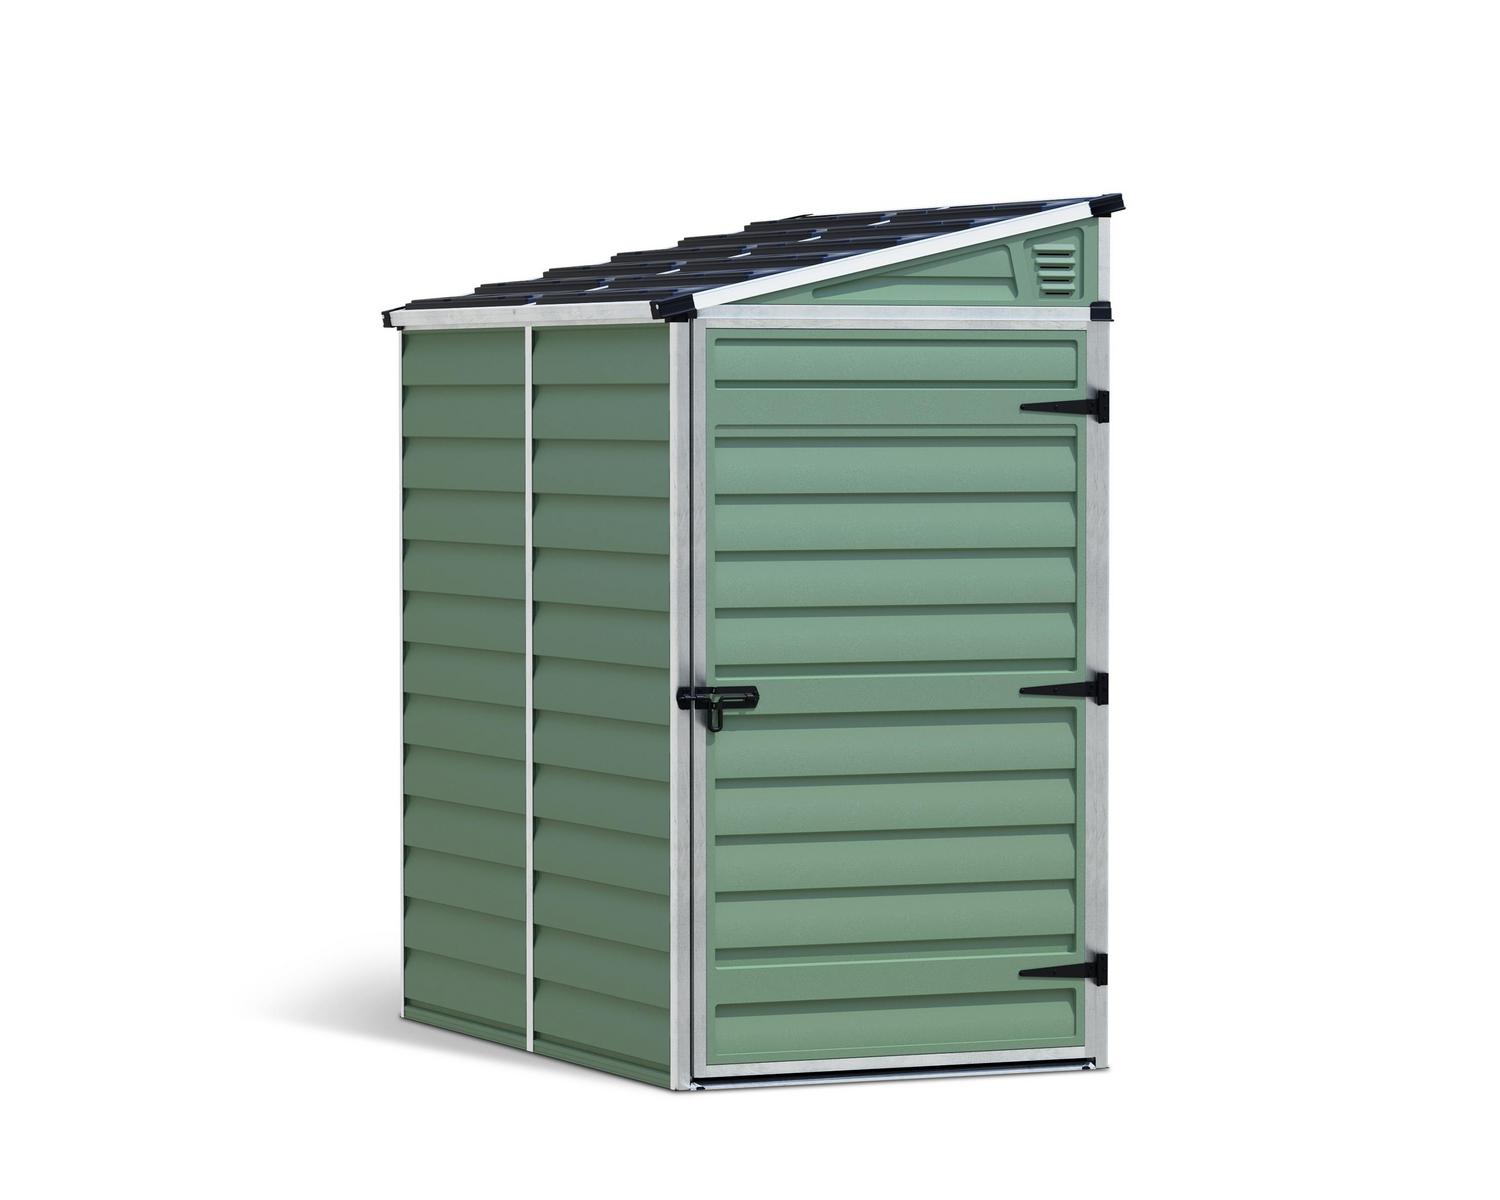 Pent 4 ft. x 6 ft. Plastic Storage Shed with Green Polycarbonate Panels & Aluminium Frame